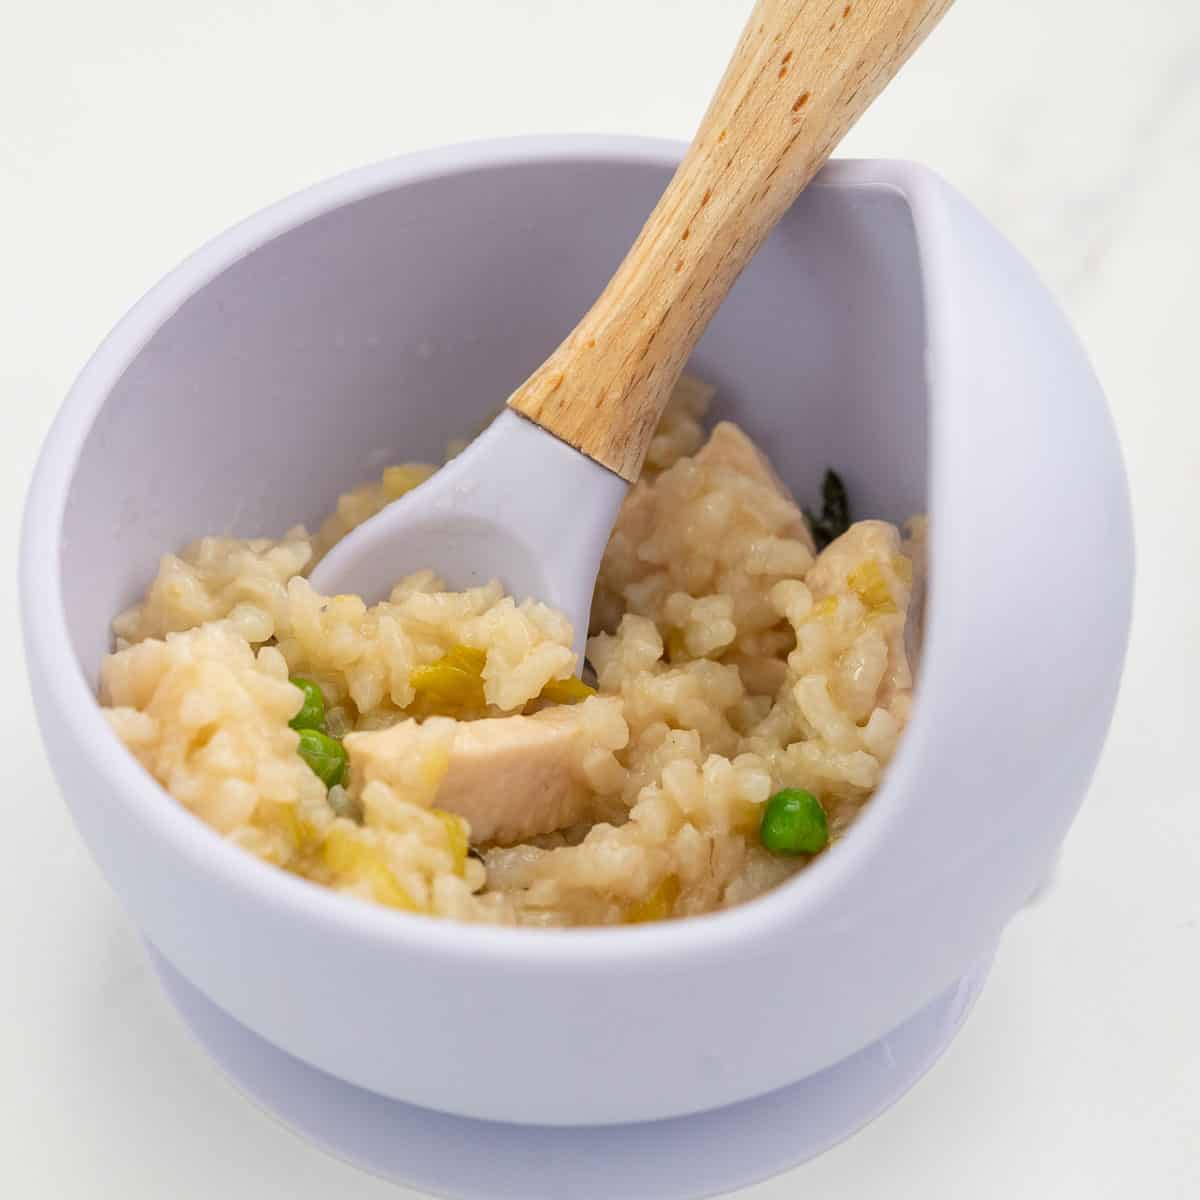 Chicken and leek risotto in a silicone baby bowl.